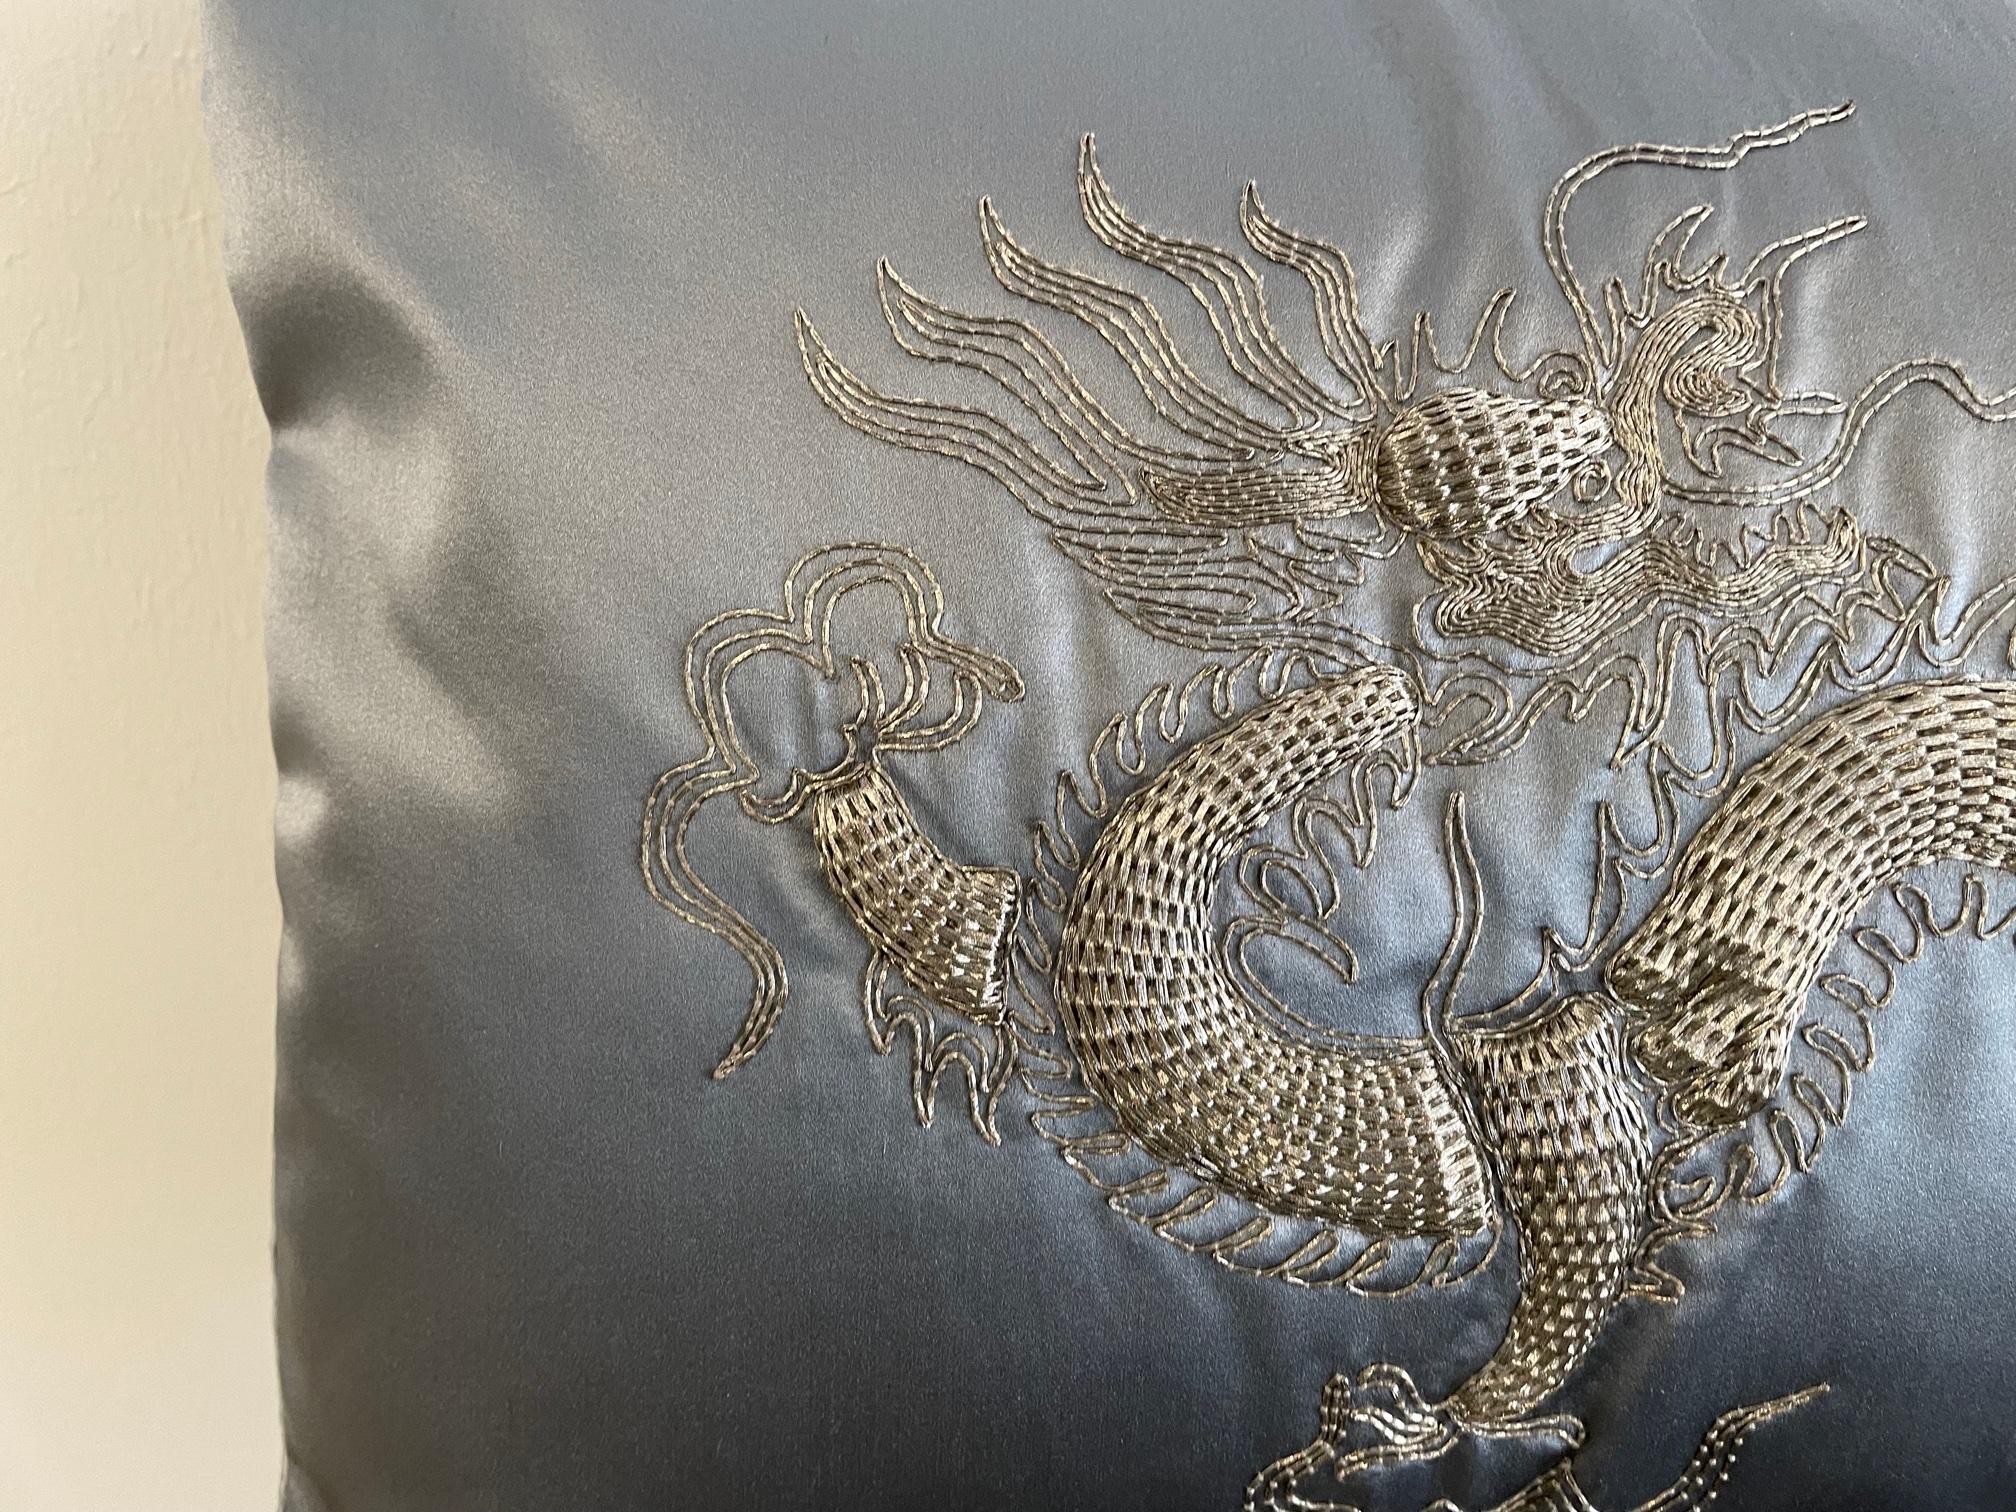 Cushion with dragon design, hand embroidery with silver thread on silk satin col. silver grey -
Showroom Piece - few crinkle marks on the silk, embroidery in perfect condition, self piped, inner pad,


Size 54 x 33cm.